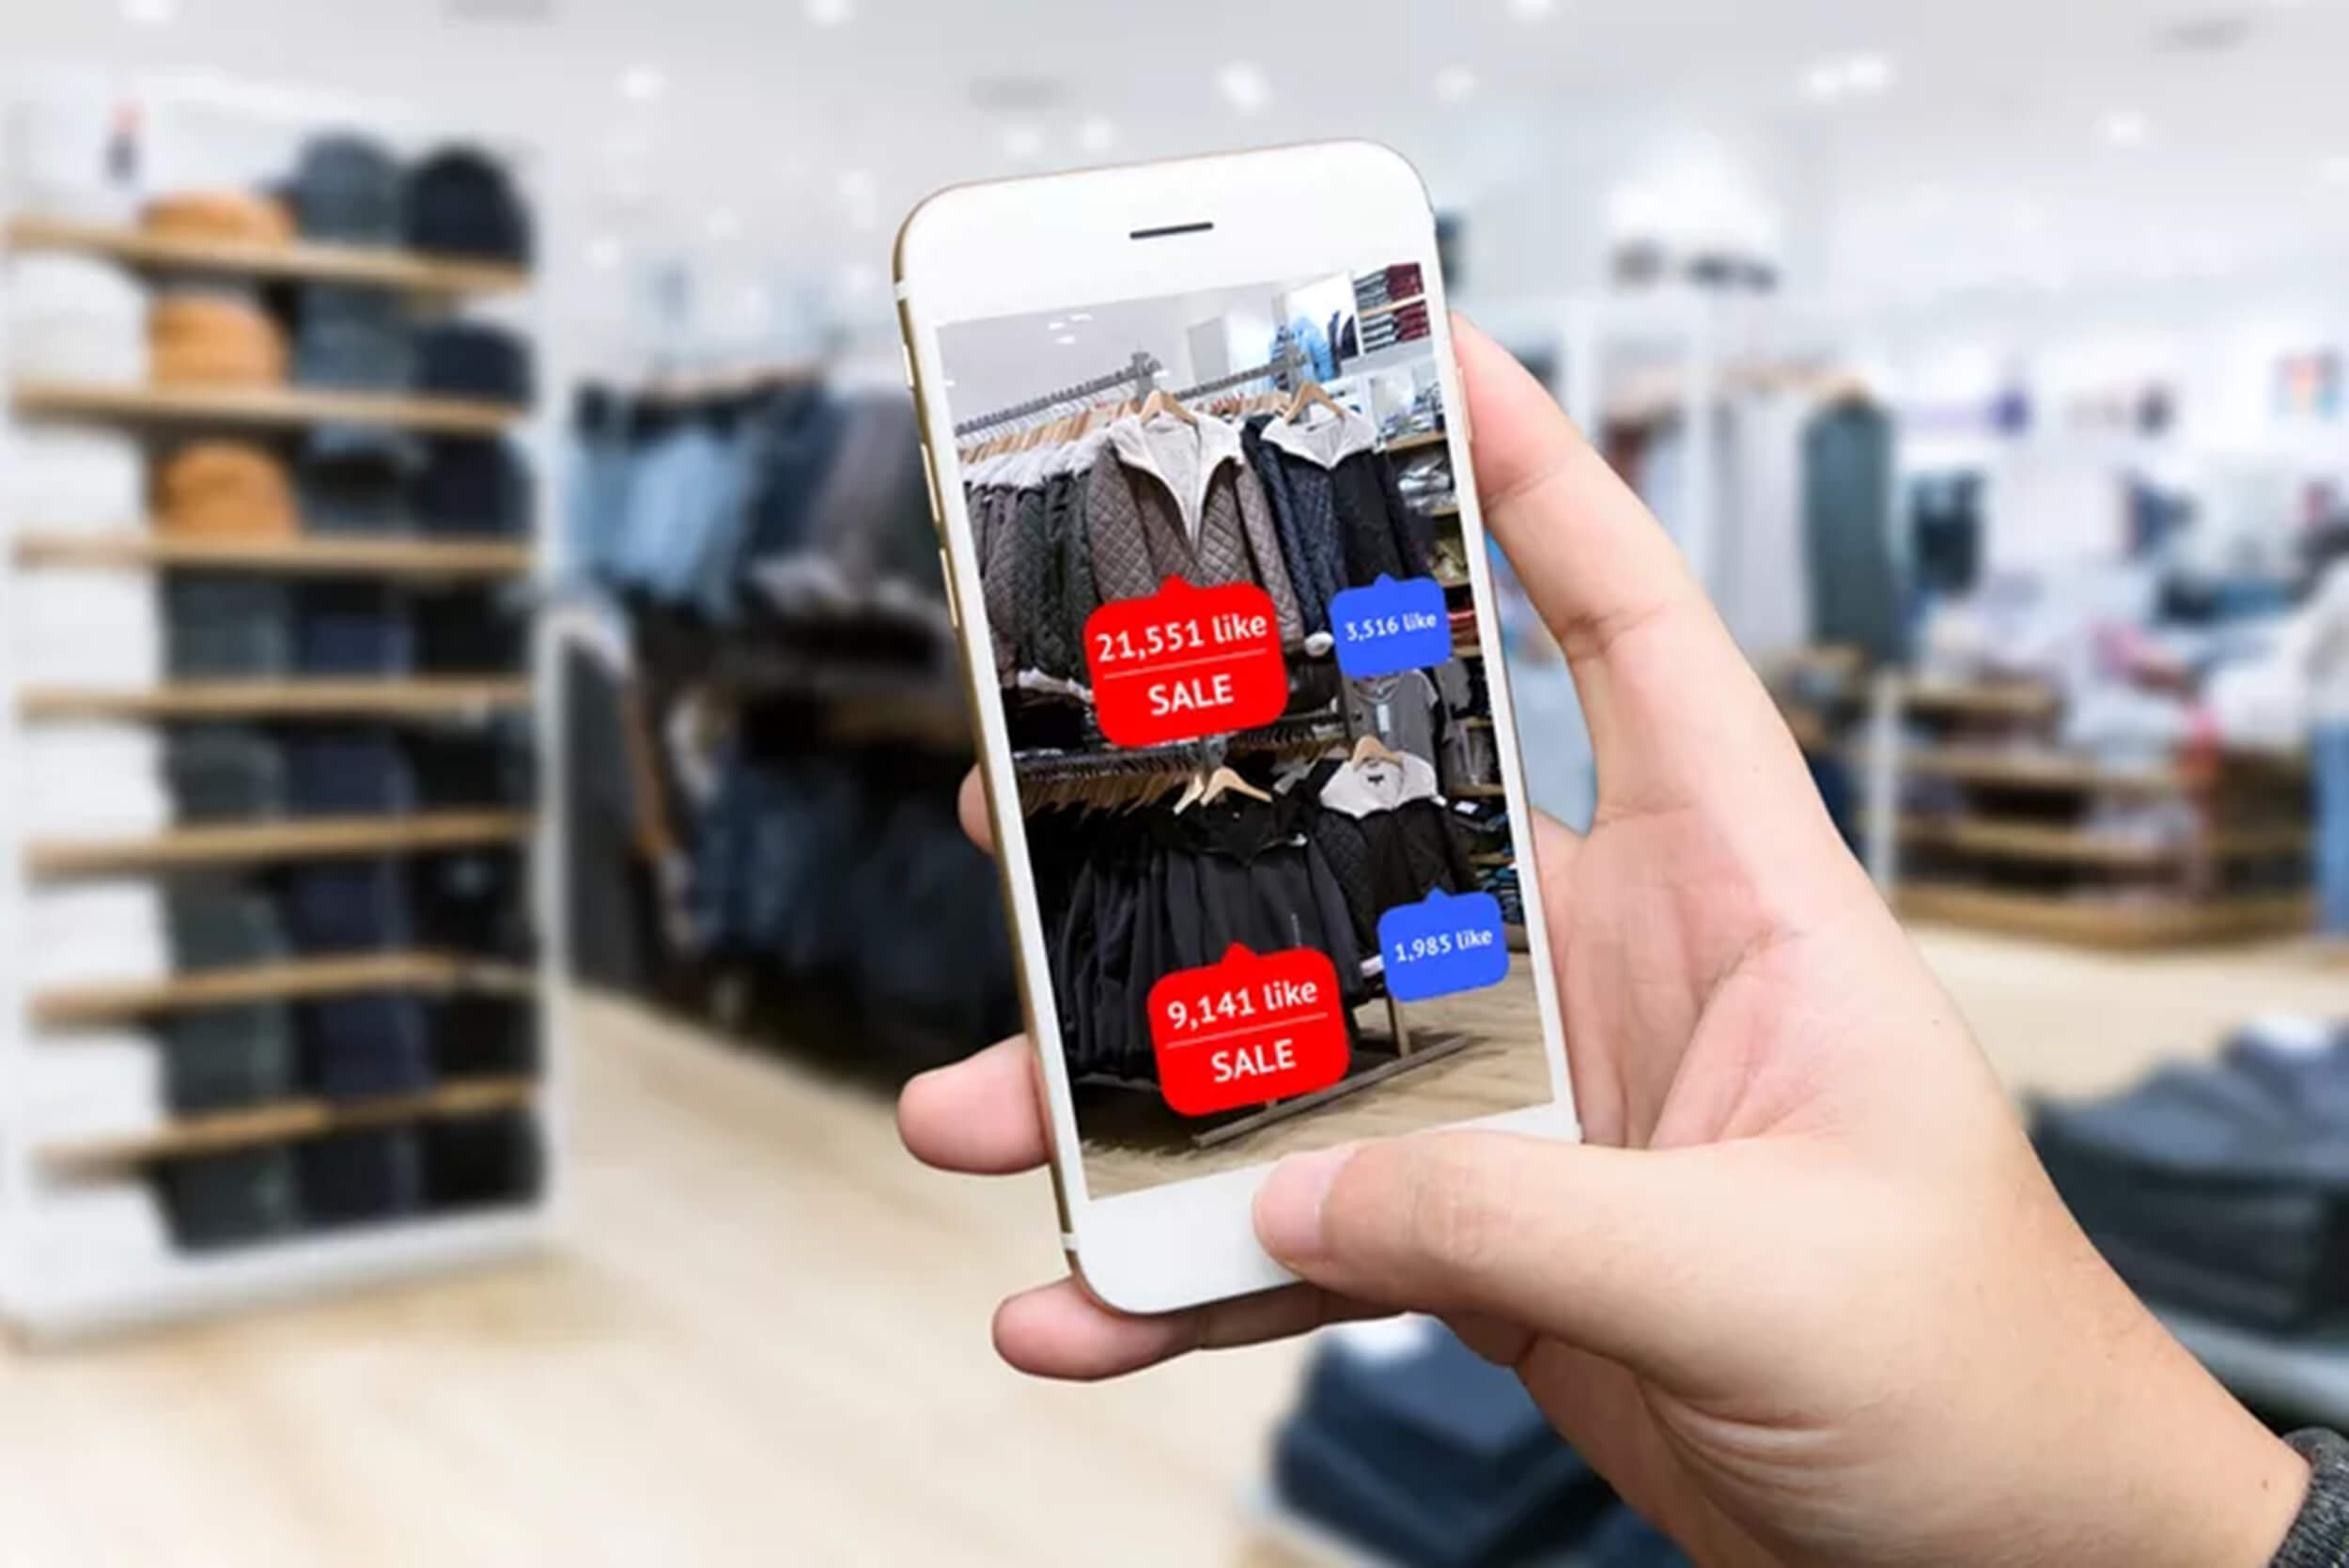 Using webAR in-store allows customers to gain information on the go